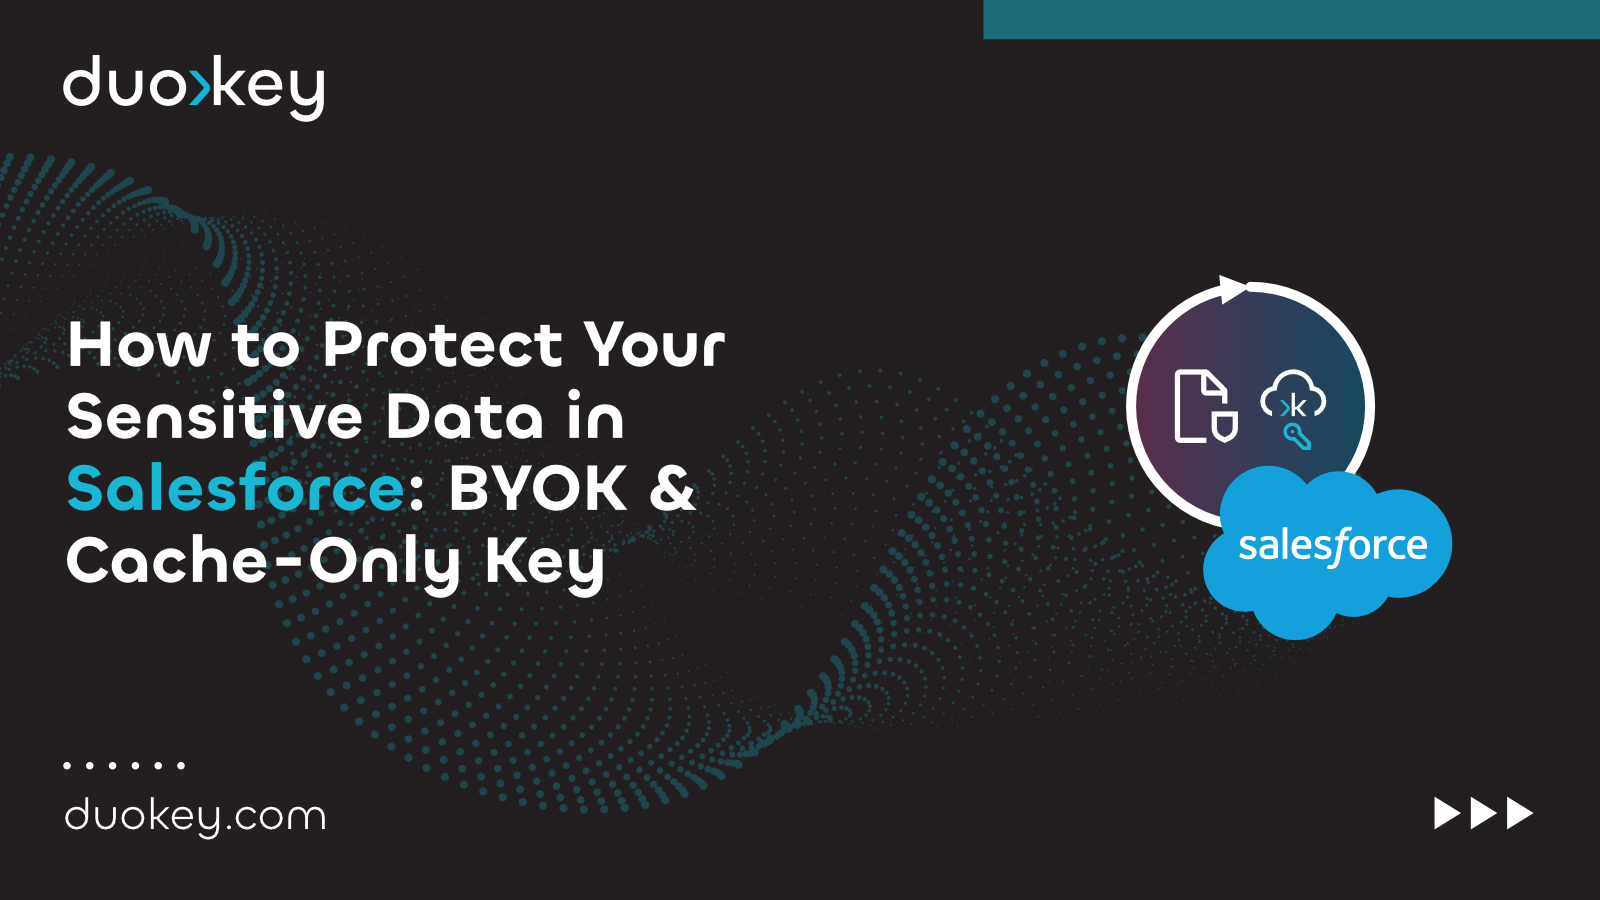 How to Protect Your Sensitive Data in Salesforce with DuoKey